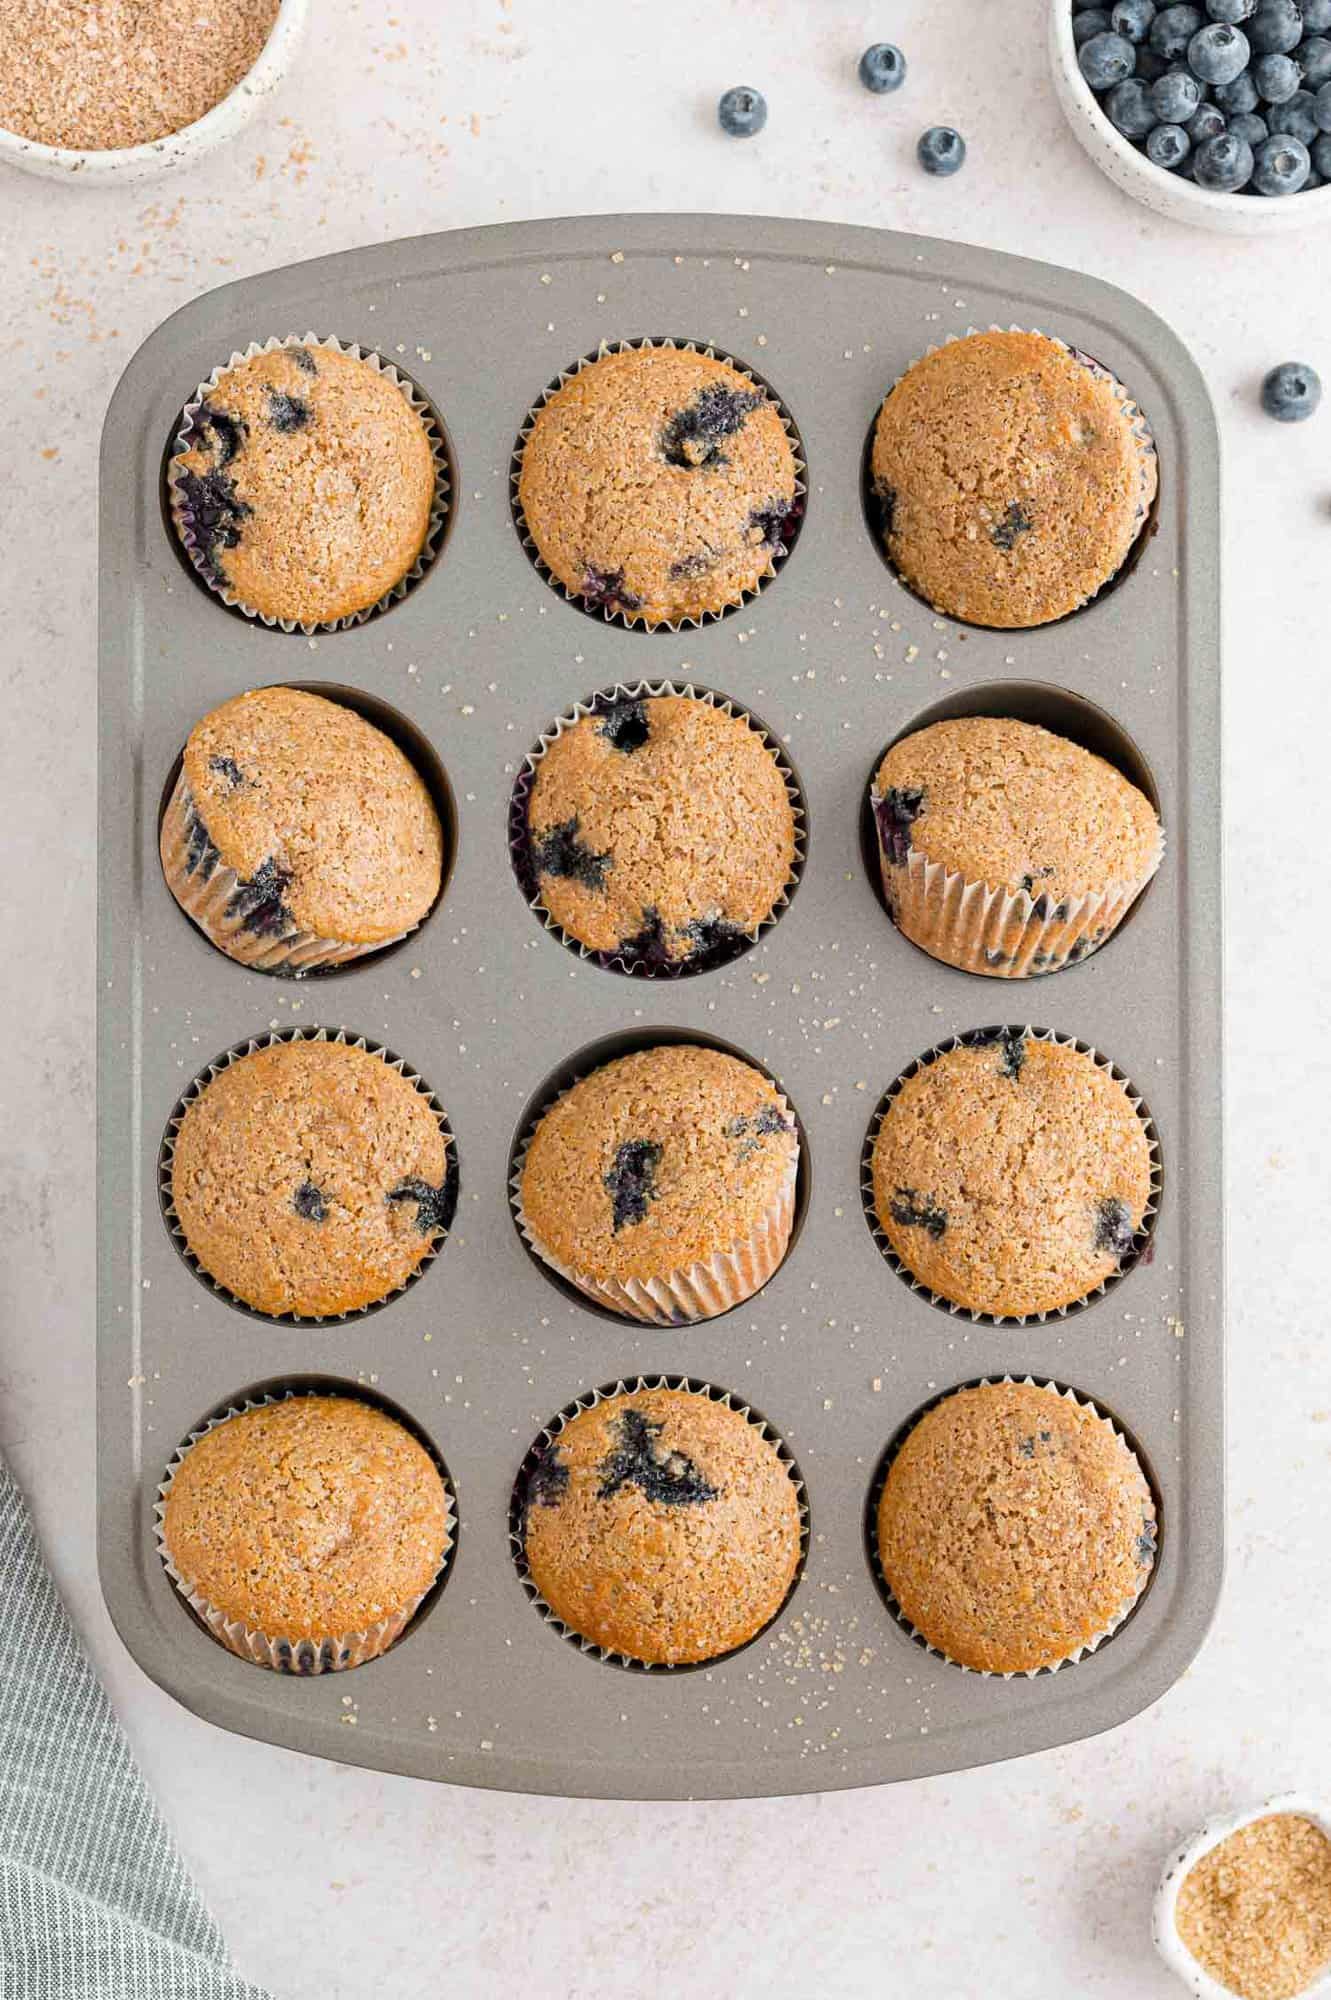 Baked muffins in tin.